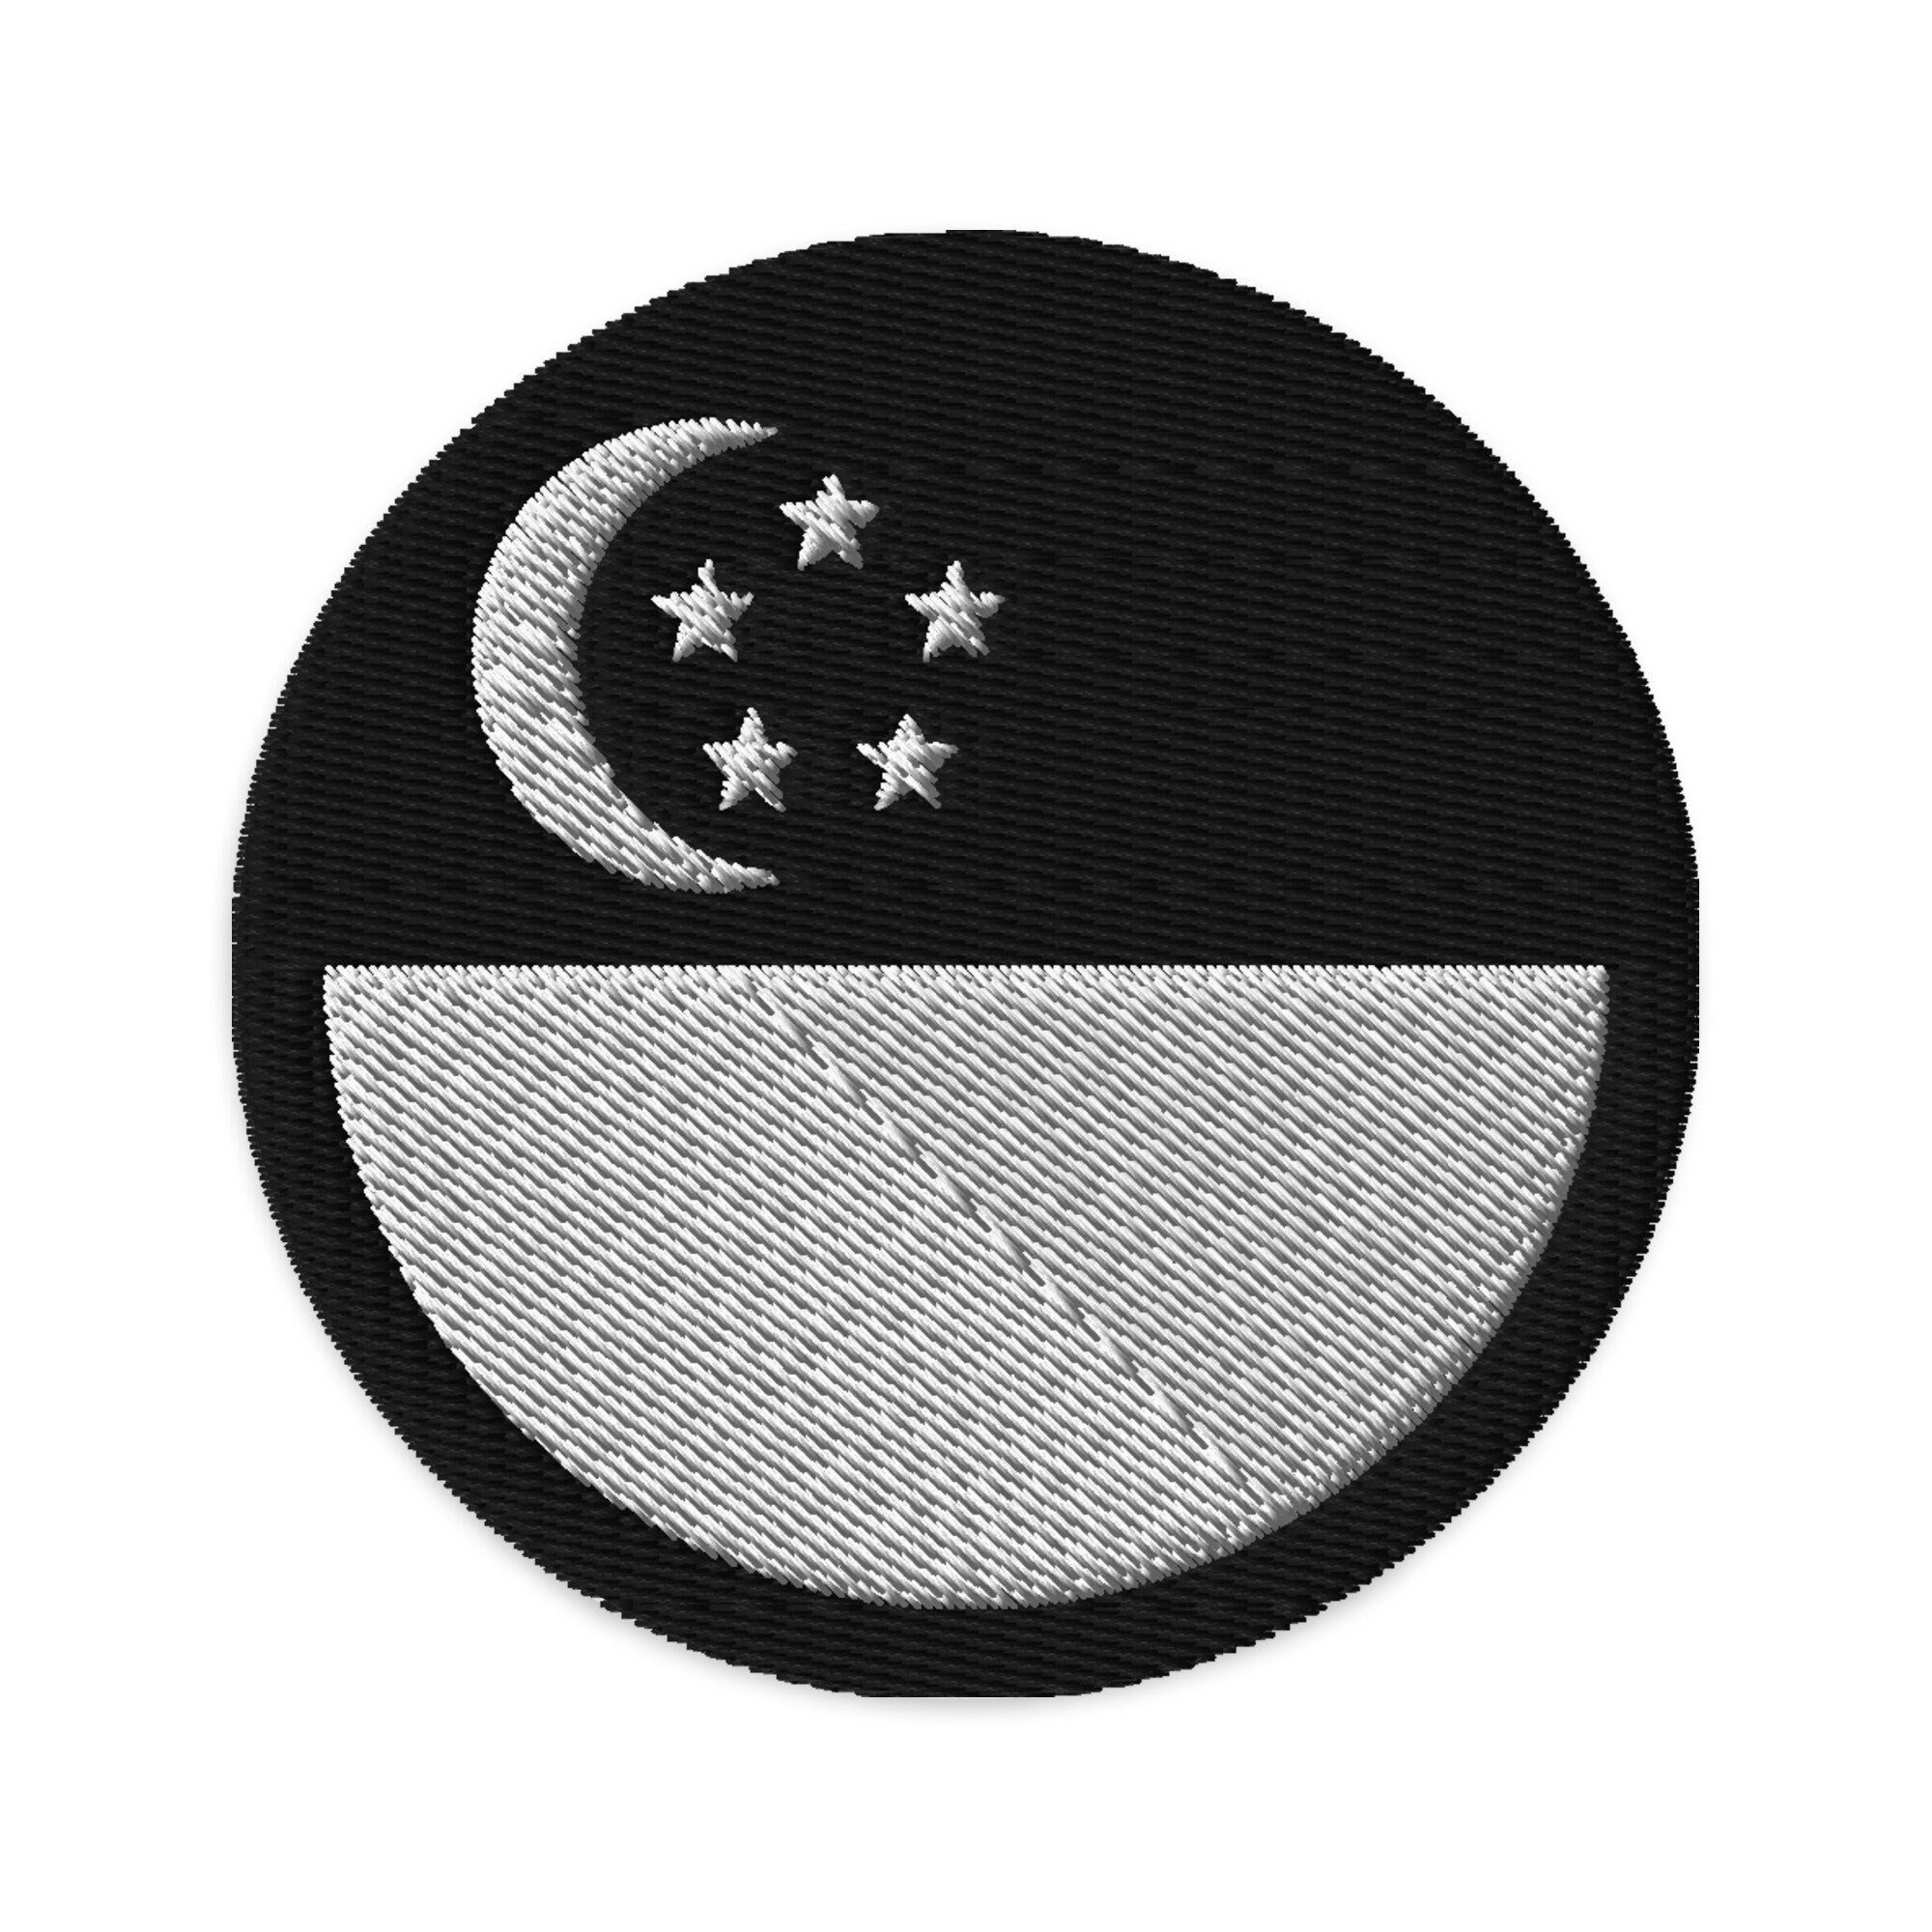 Singapore Embroidered Patch, 3" Singapore Flag Patch, Circular Singapore Patch Embroidery, Iron on/Sew on Patch Embroidery, Singapura